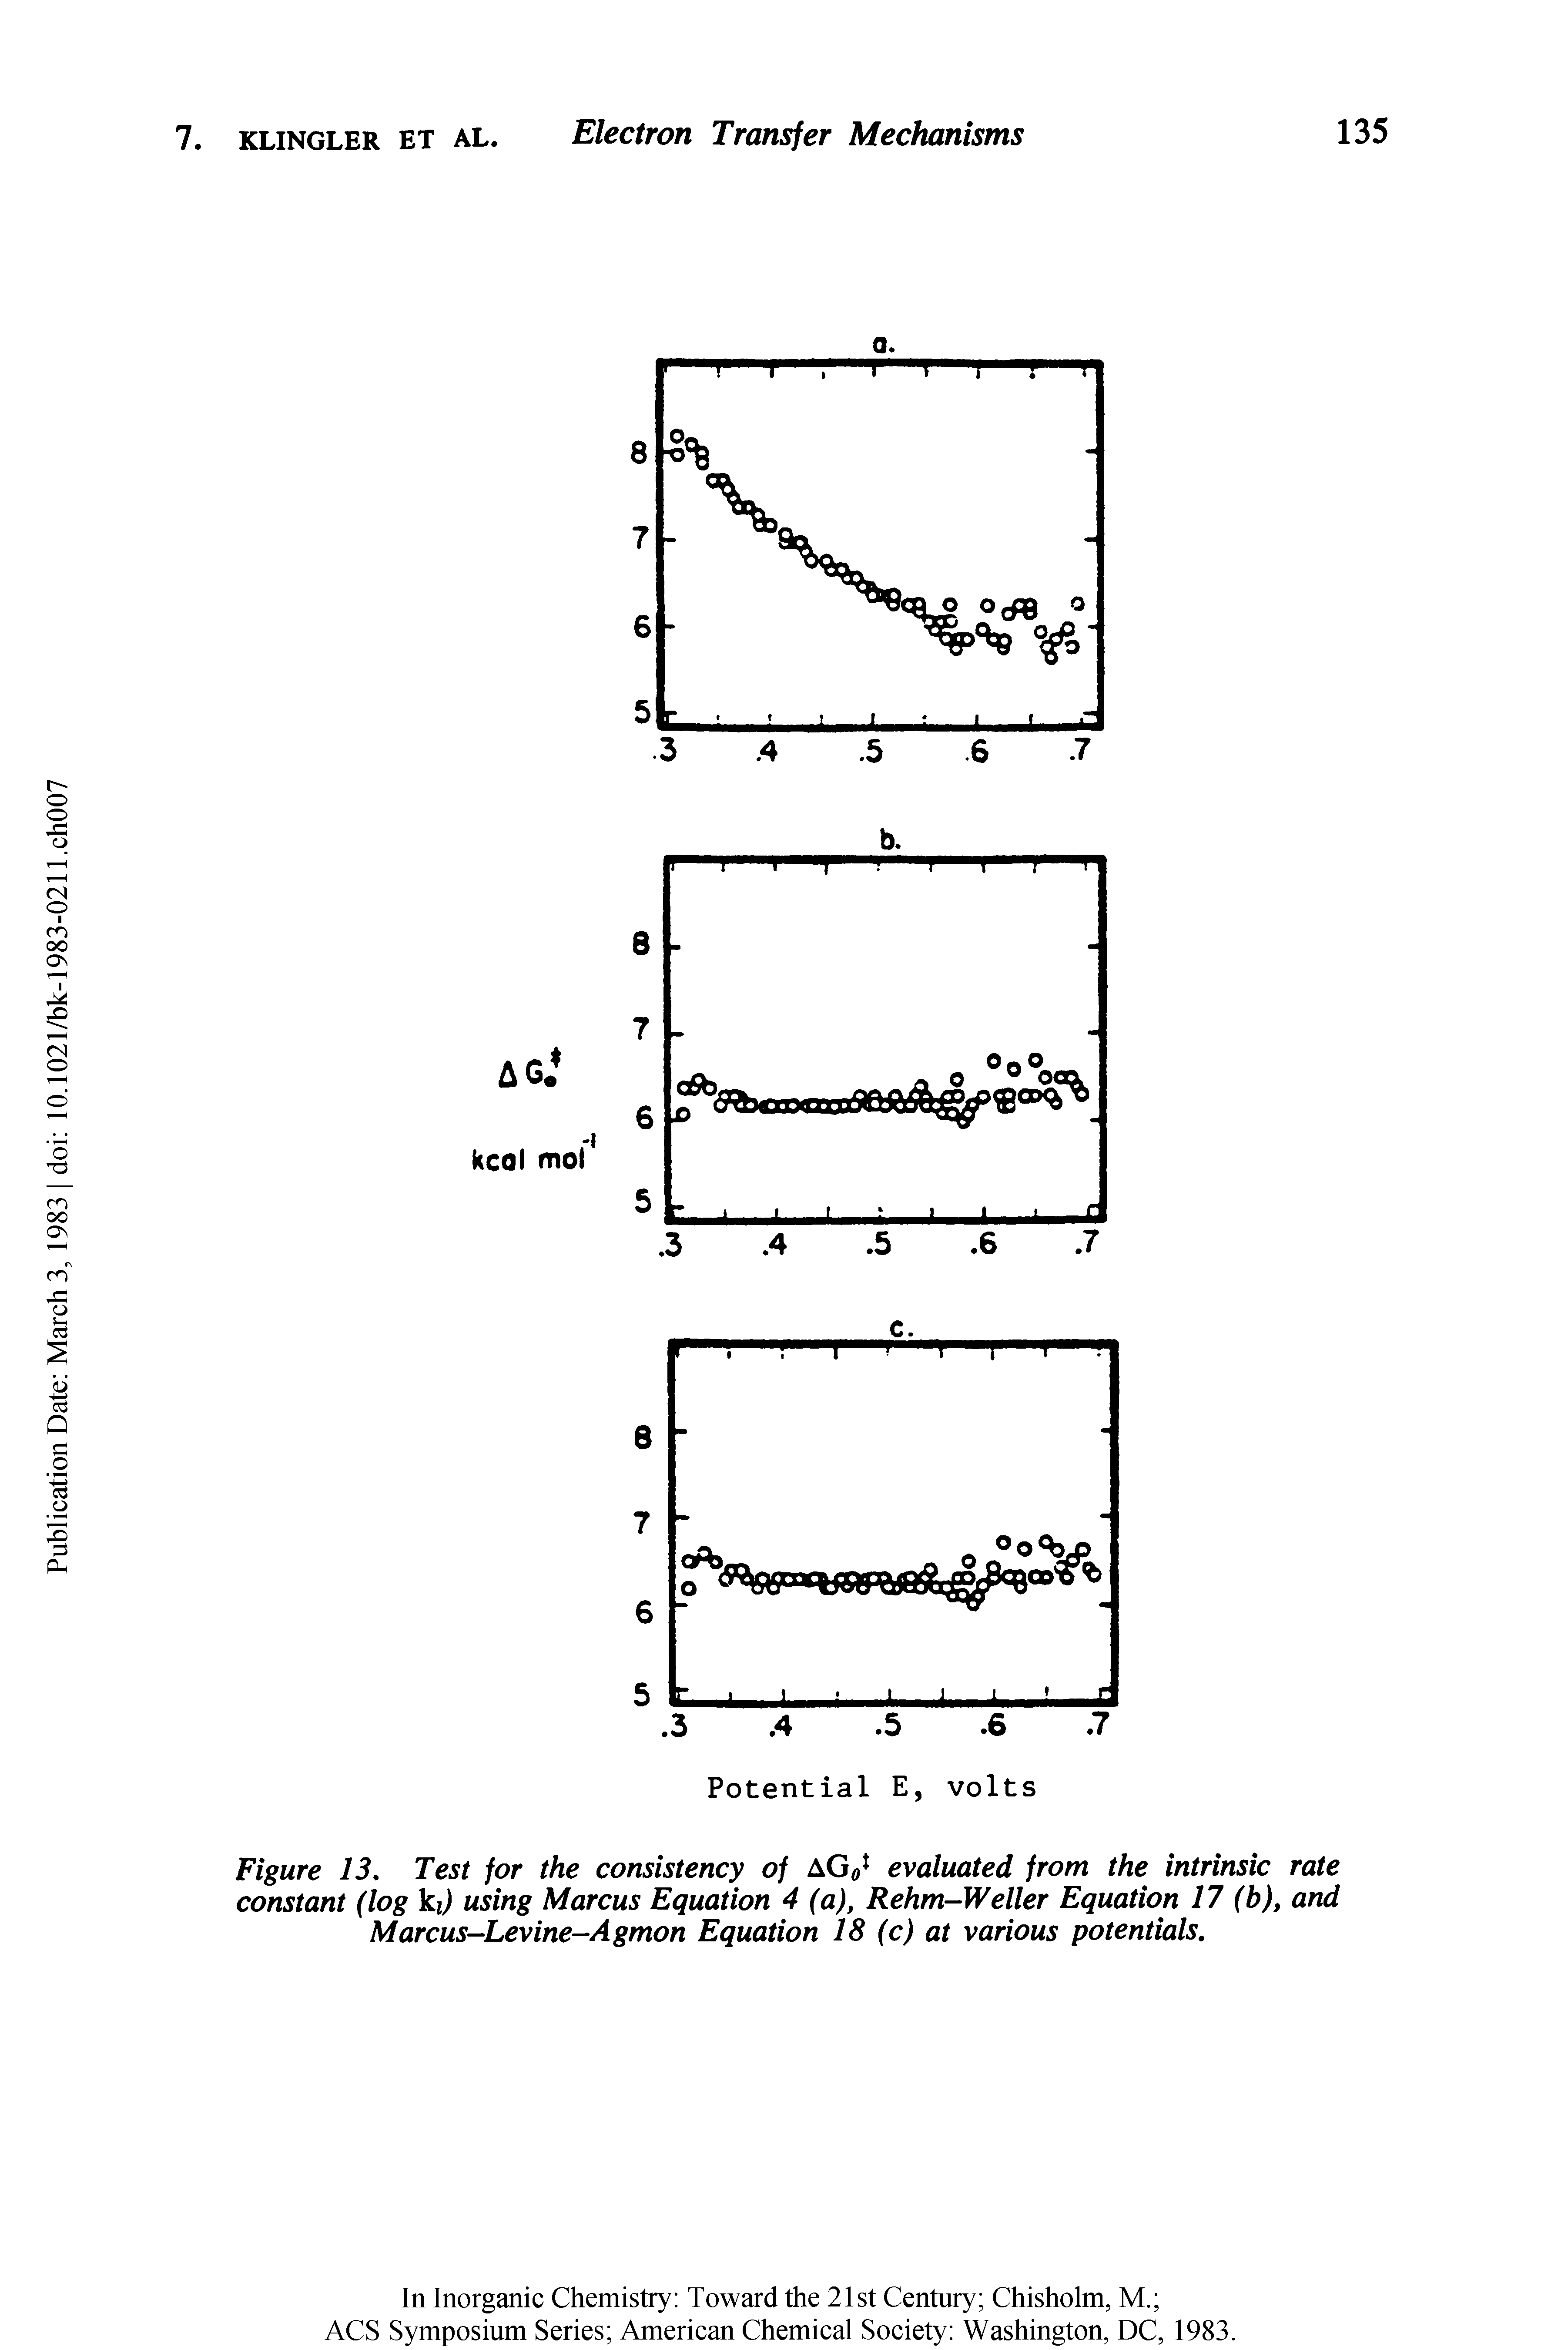 Figure 13. Test for the consistency of AG evaluated from the intrinsic rate constant (log kj using Marcus Equation 4 (a), Rehm-Weller Equation 17 (b), and Marcus-Levine-A gmon Equation 18 (c) at various potentials.